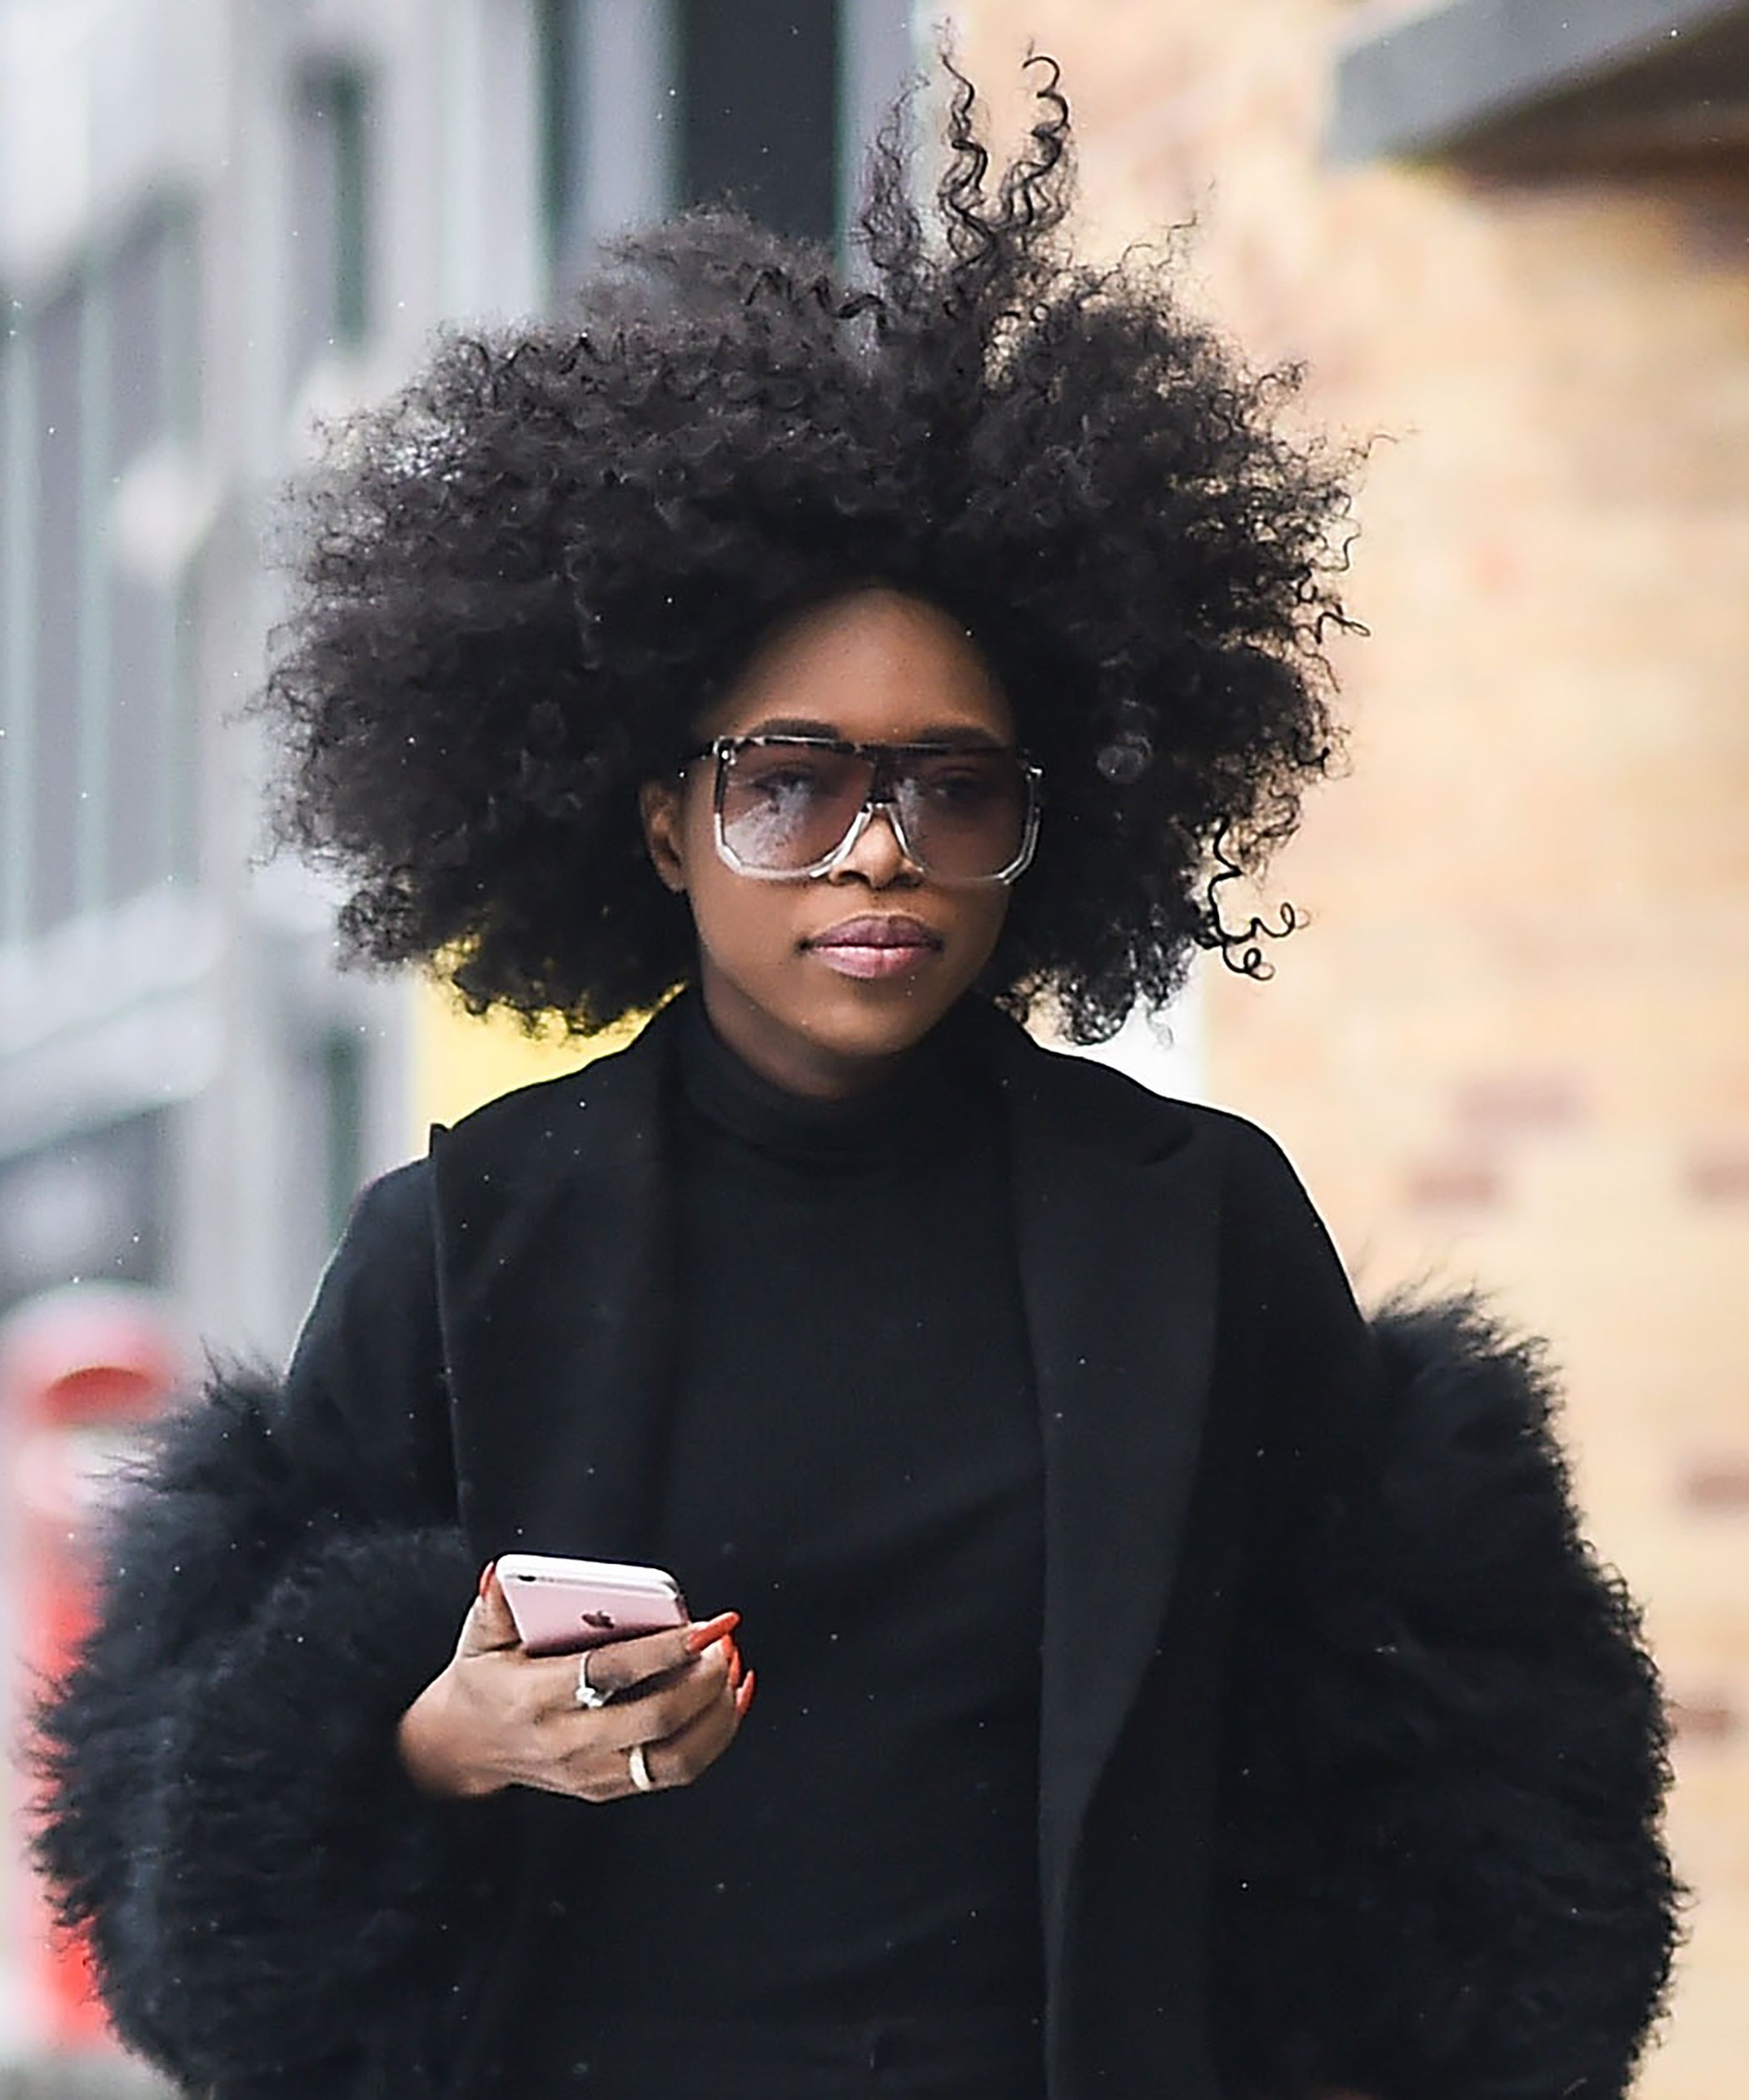 Tips For Natural Hair Care In The Winter & Cold Weather